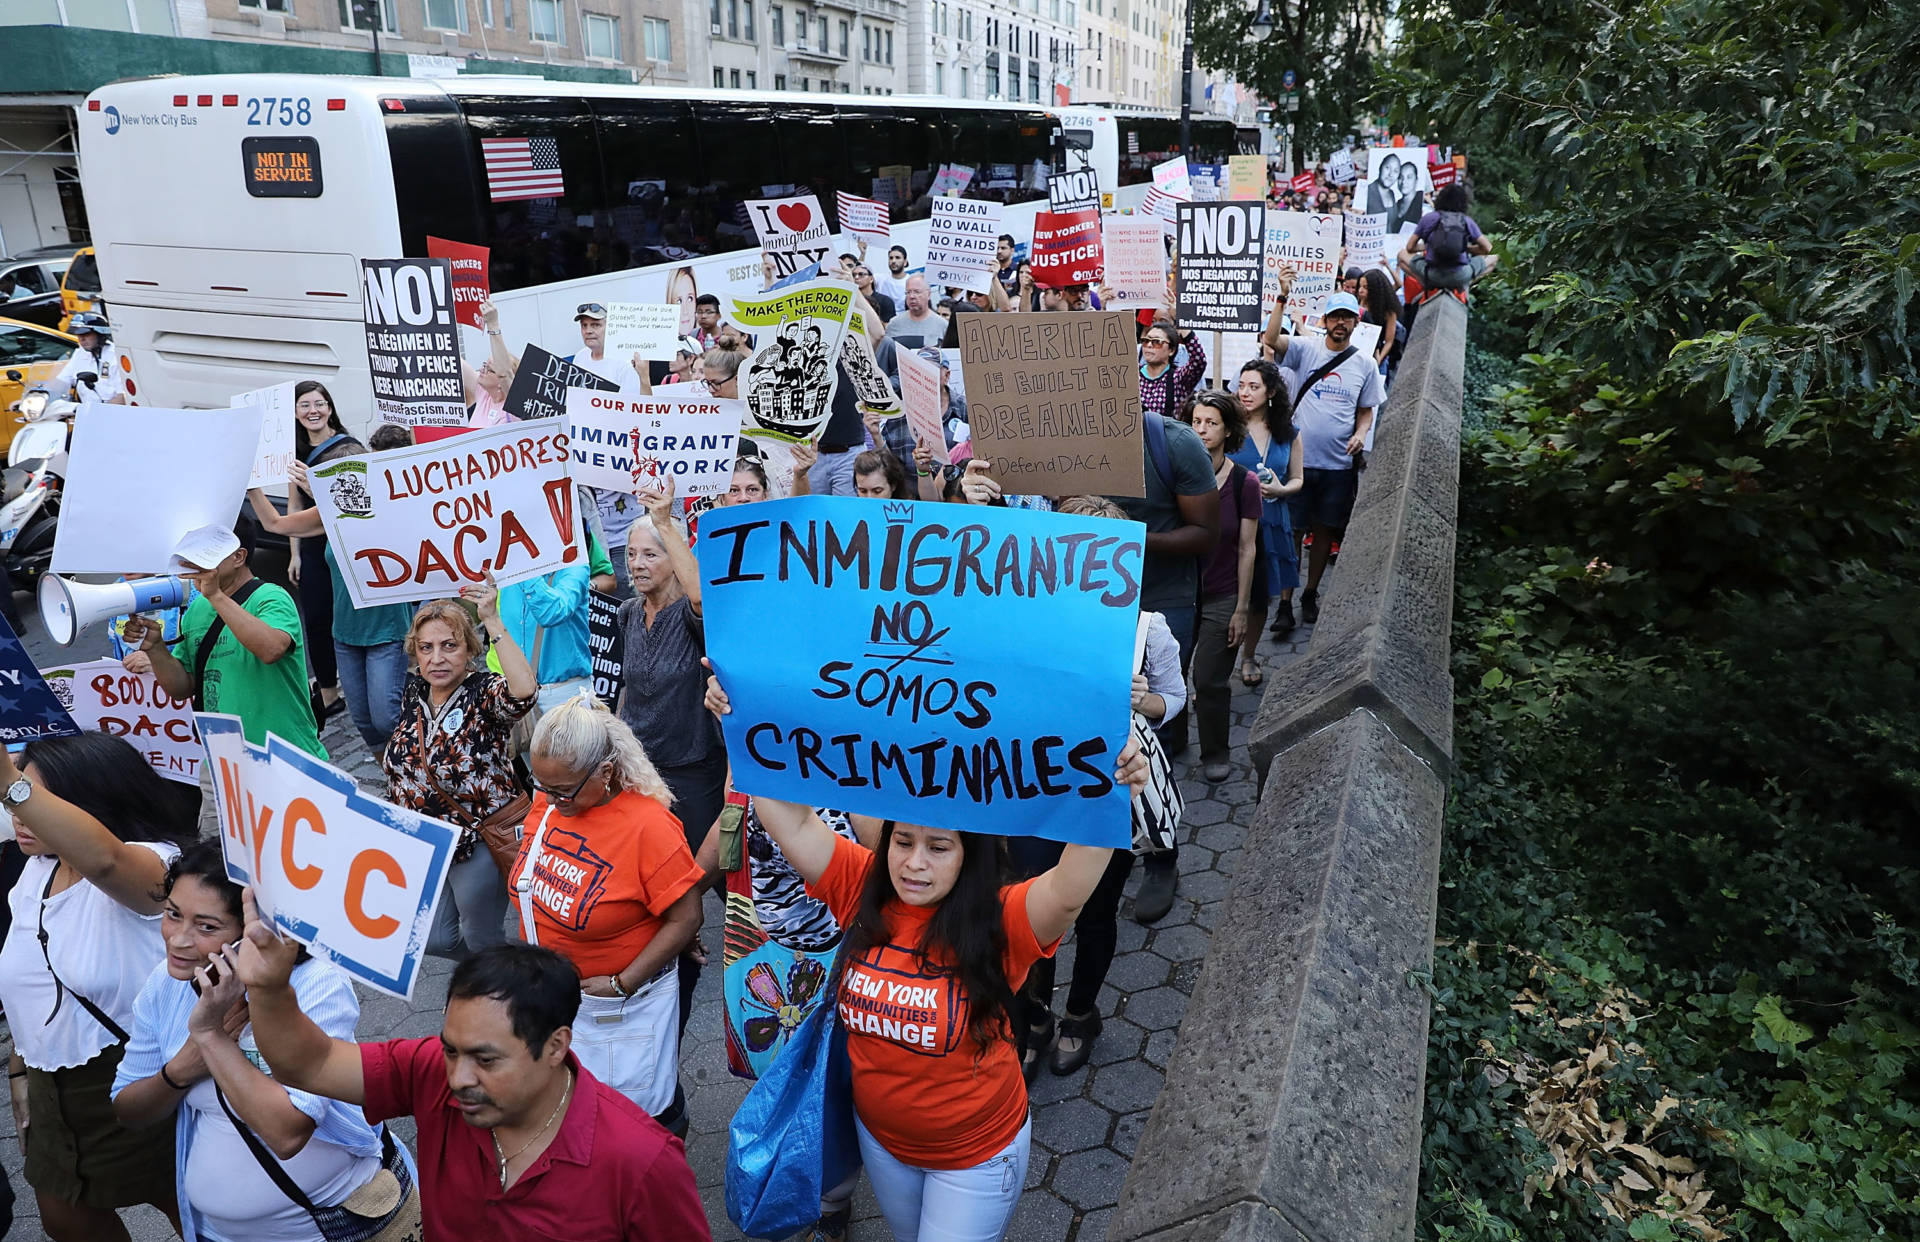 Hundreds of immigration advocates and supporters attend a rally and march to Trump Tower in support of the Deferred Action for Childhood Arrivals program, also known as DACA, on Aug. 30 in New York City. Spencer Platt/Getty Images